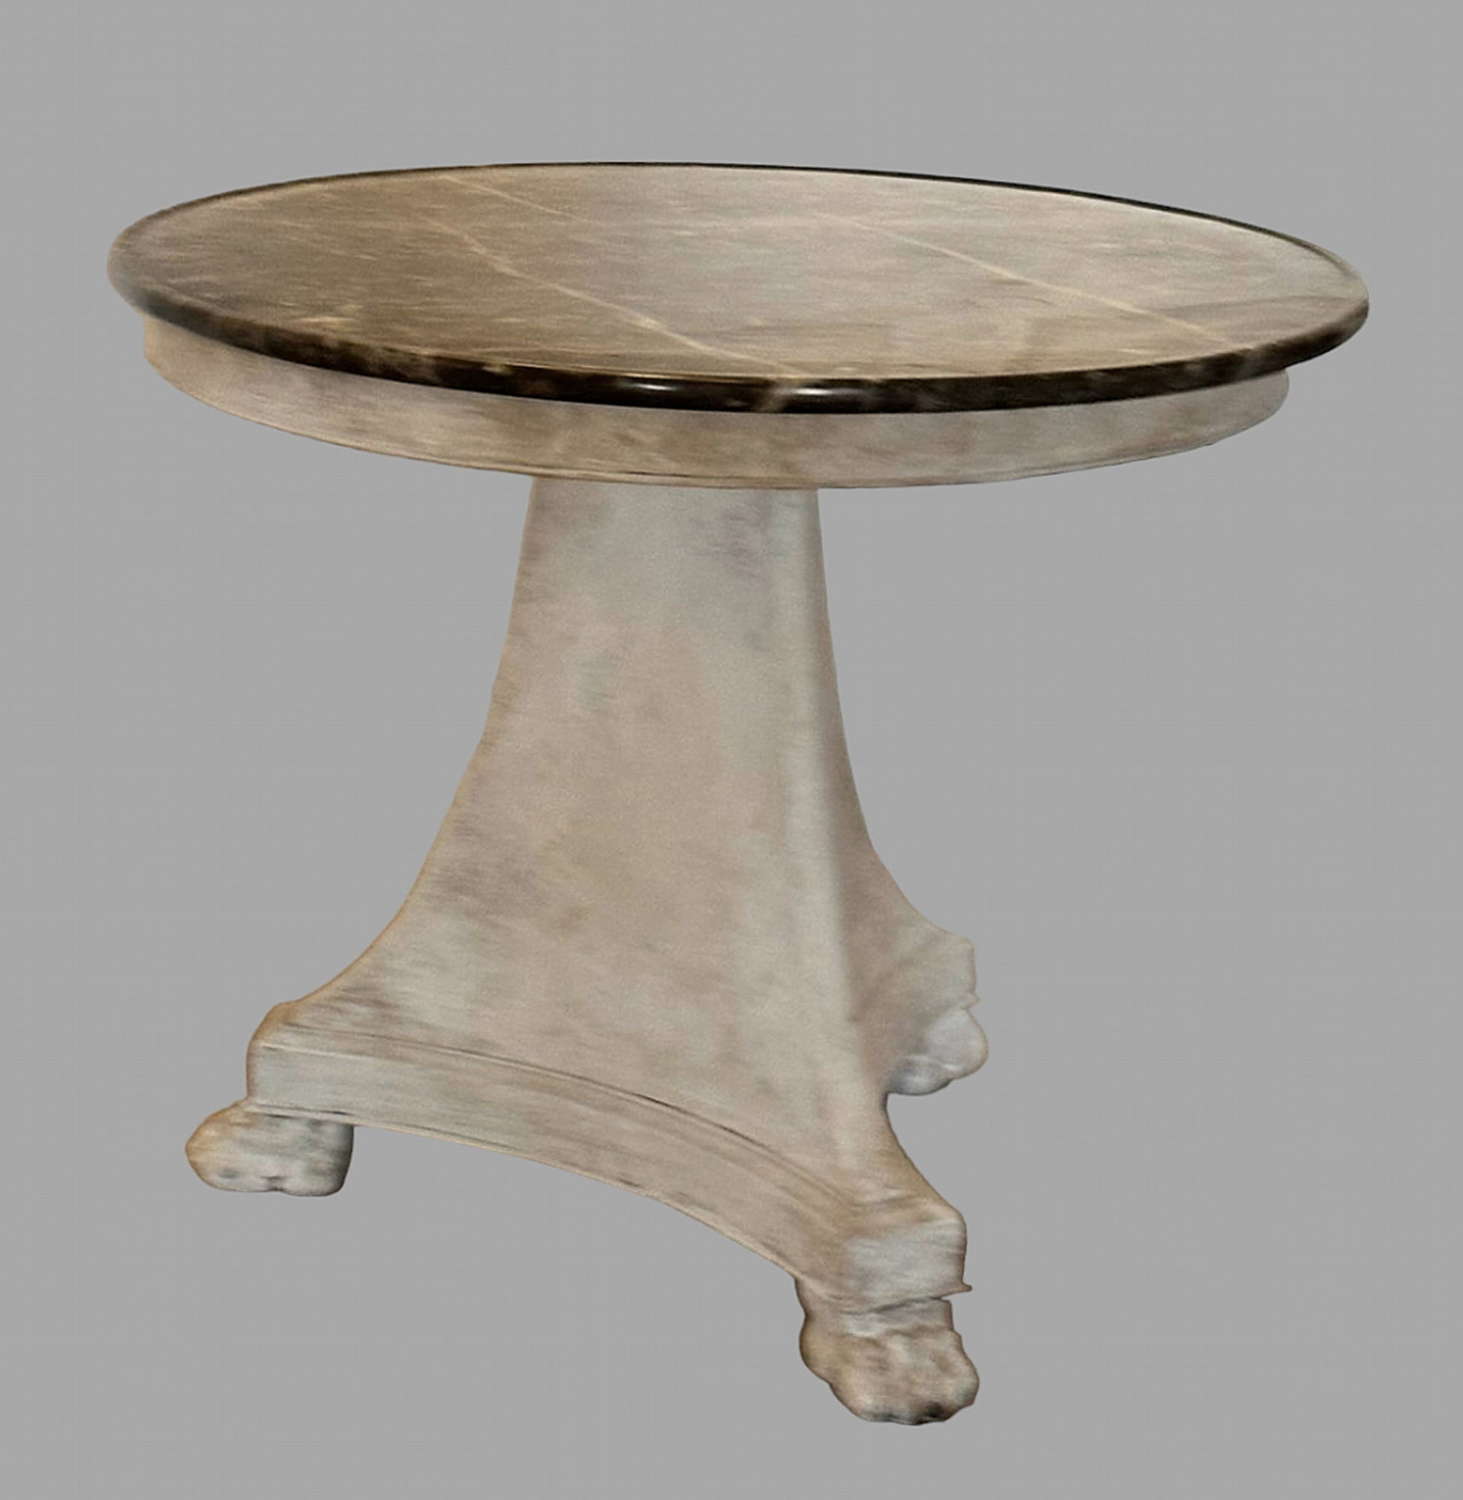 A 19th Century Painted Empire Table